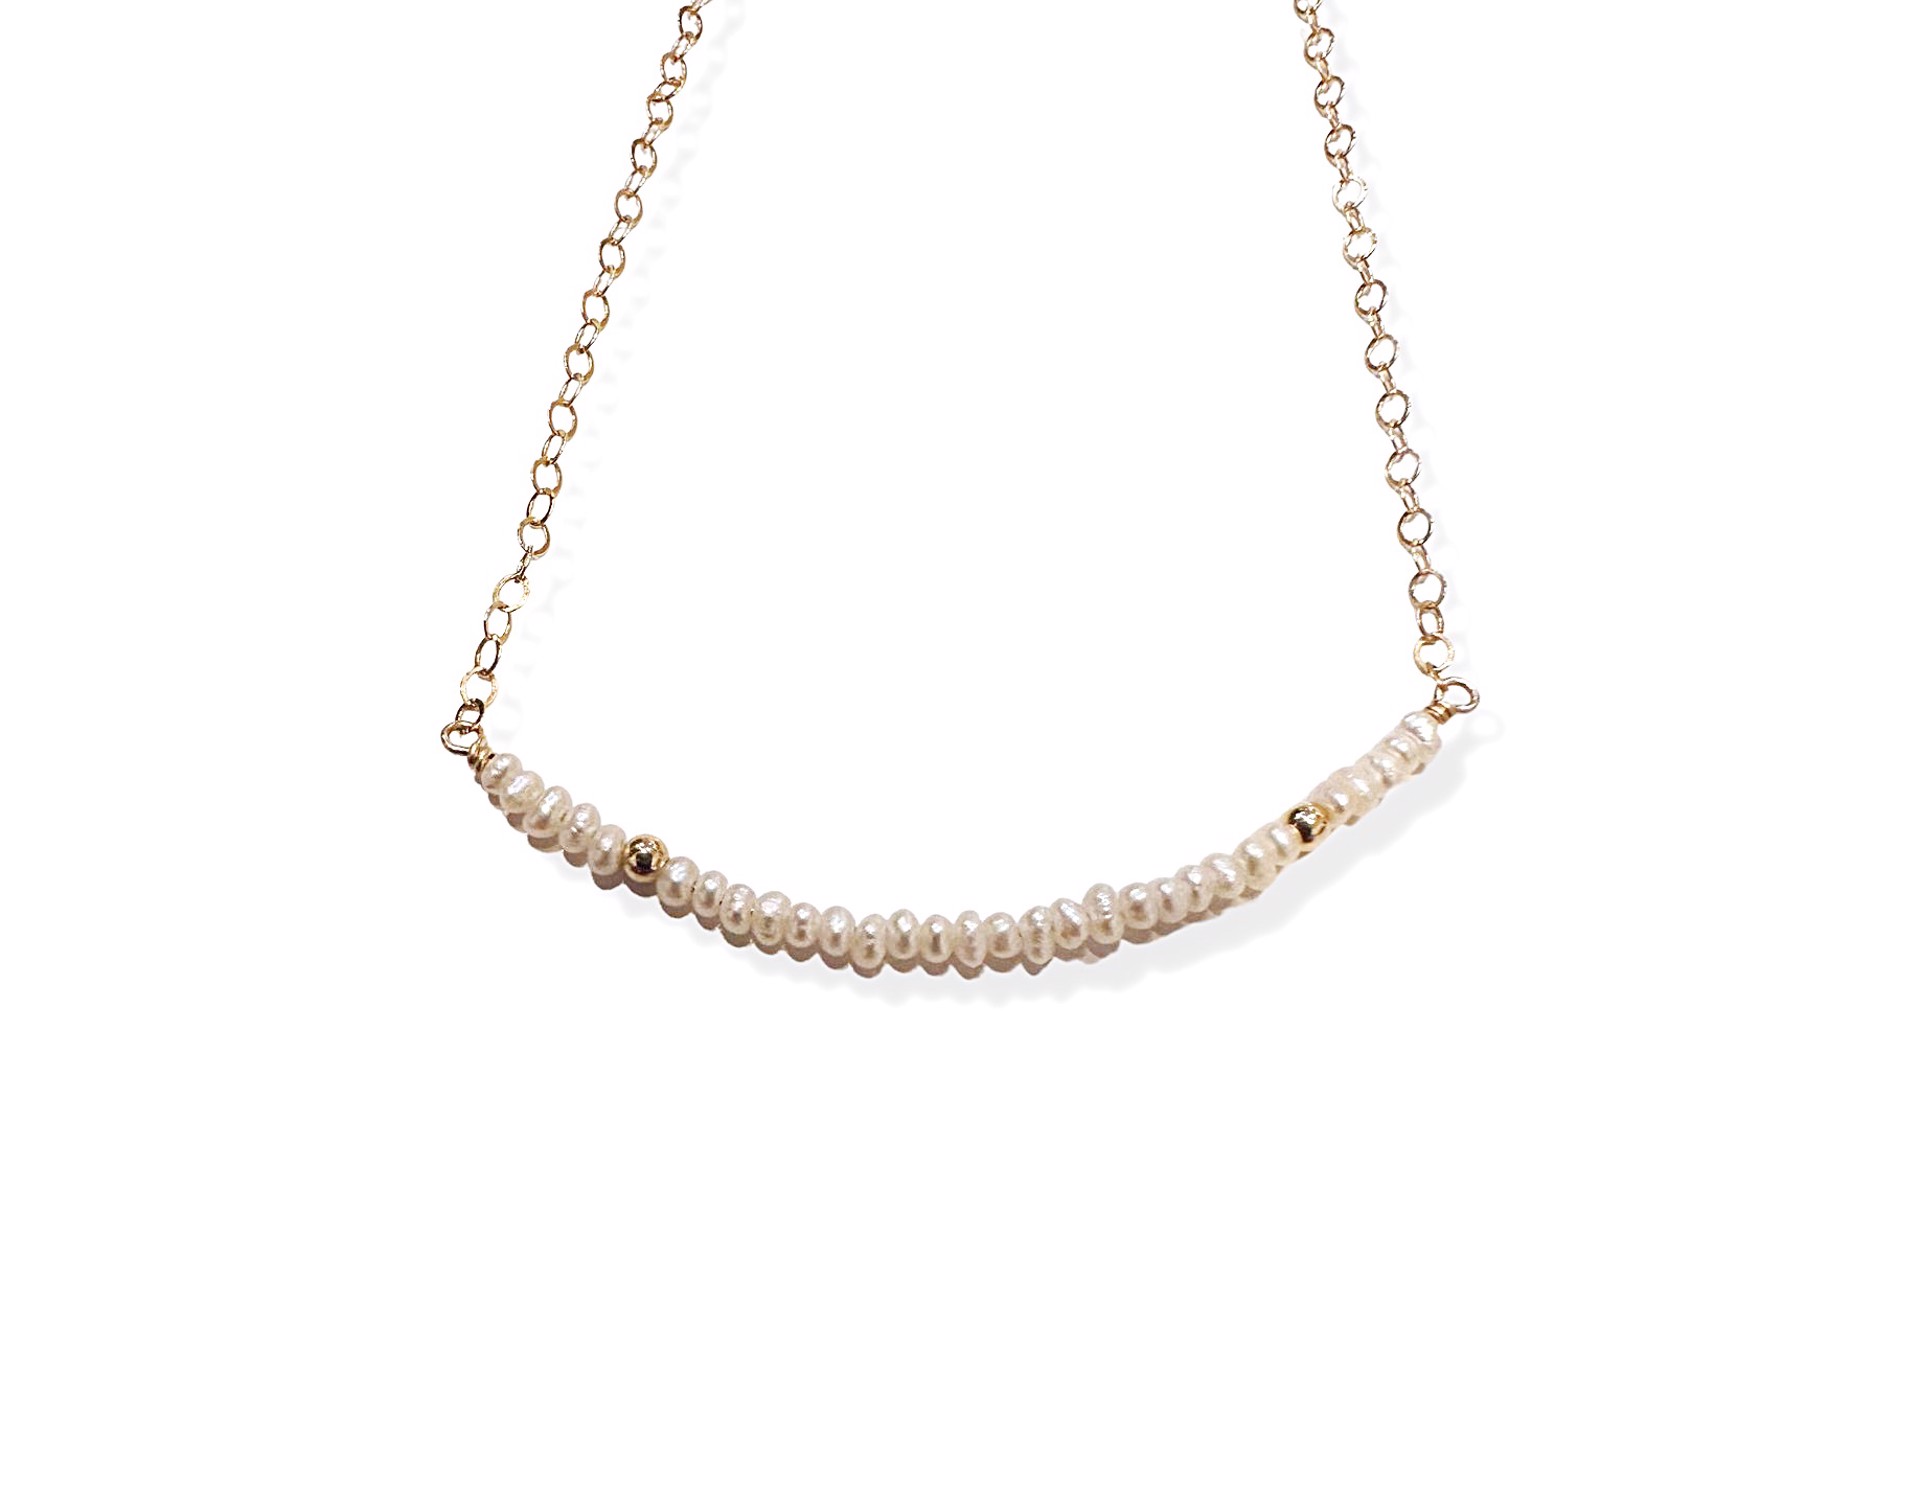 Necklace - Freshwater Pearl Bar 14K Gold Filled by Julia Balestracci